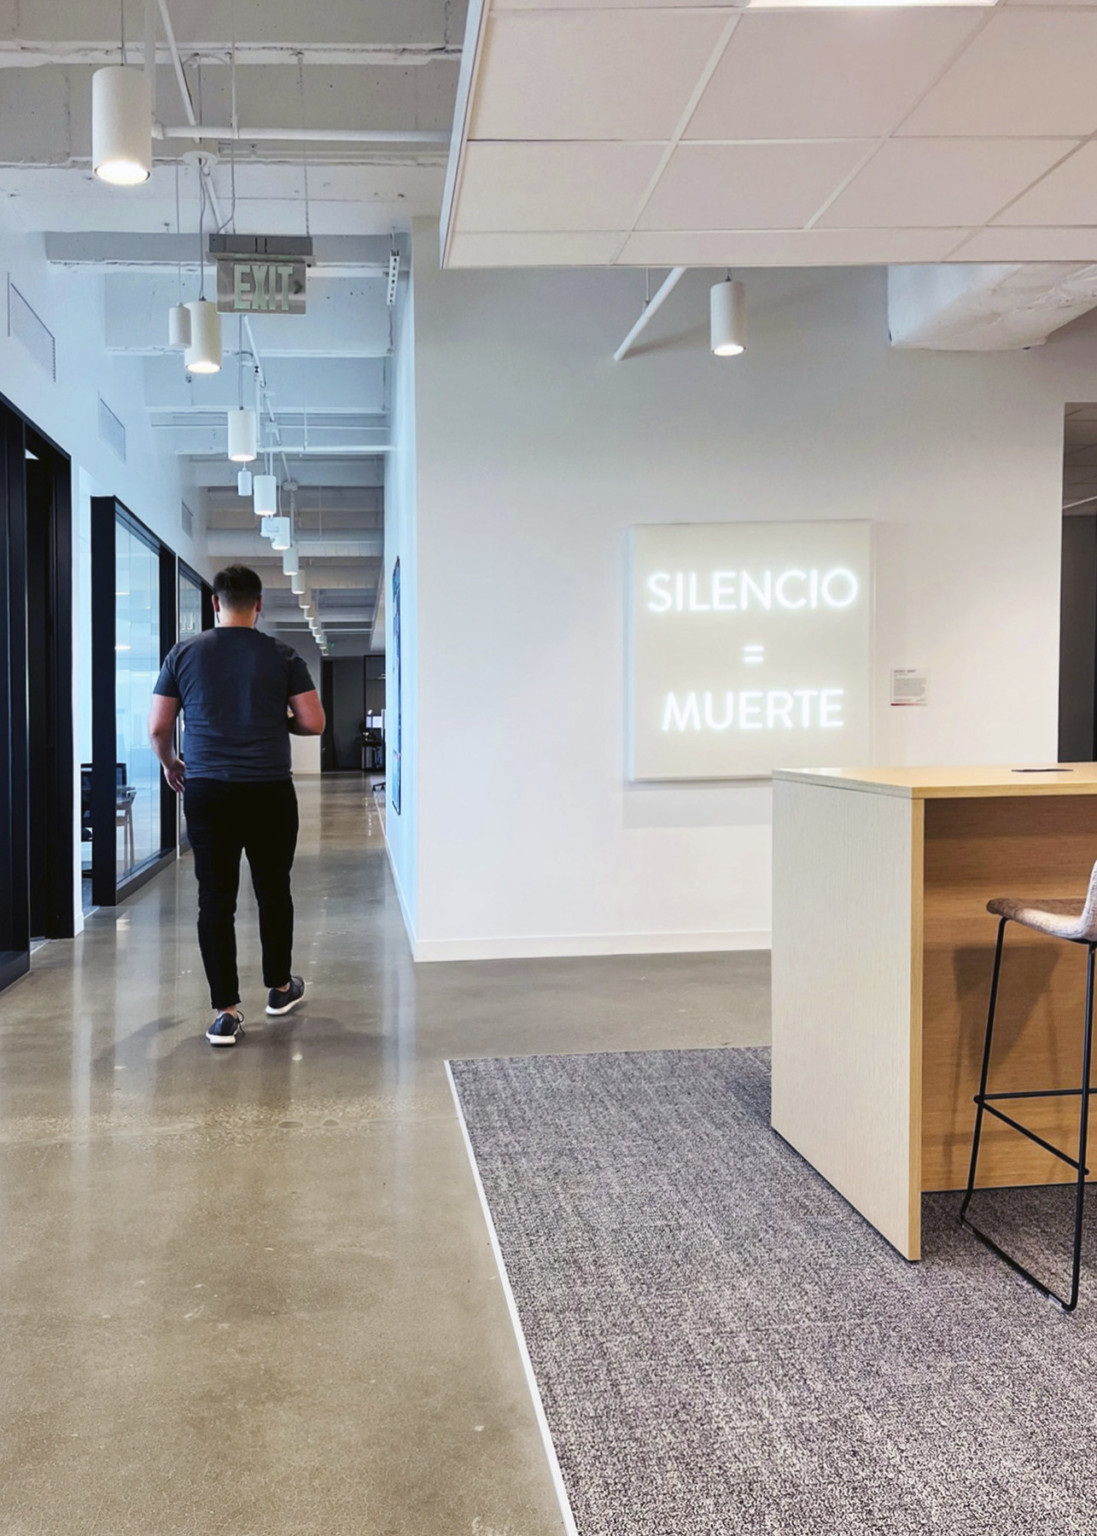 man walking down polished concrete floor with gray carpet and white walls with illuminated sign reading silencio = muerte